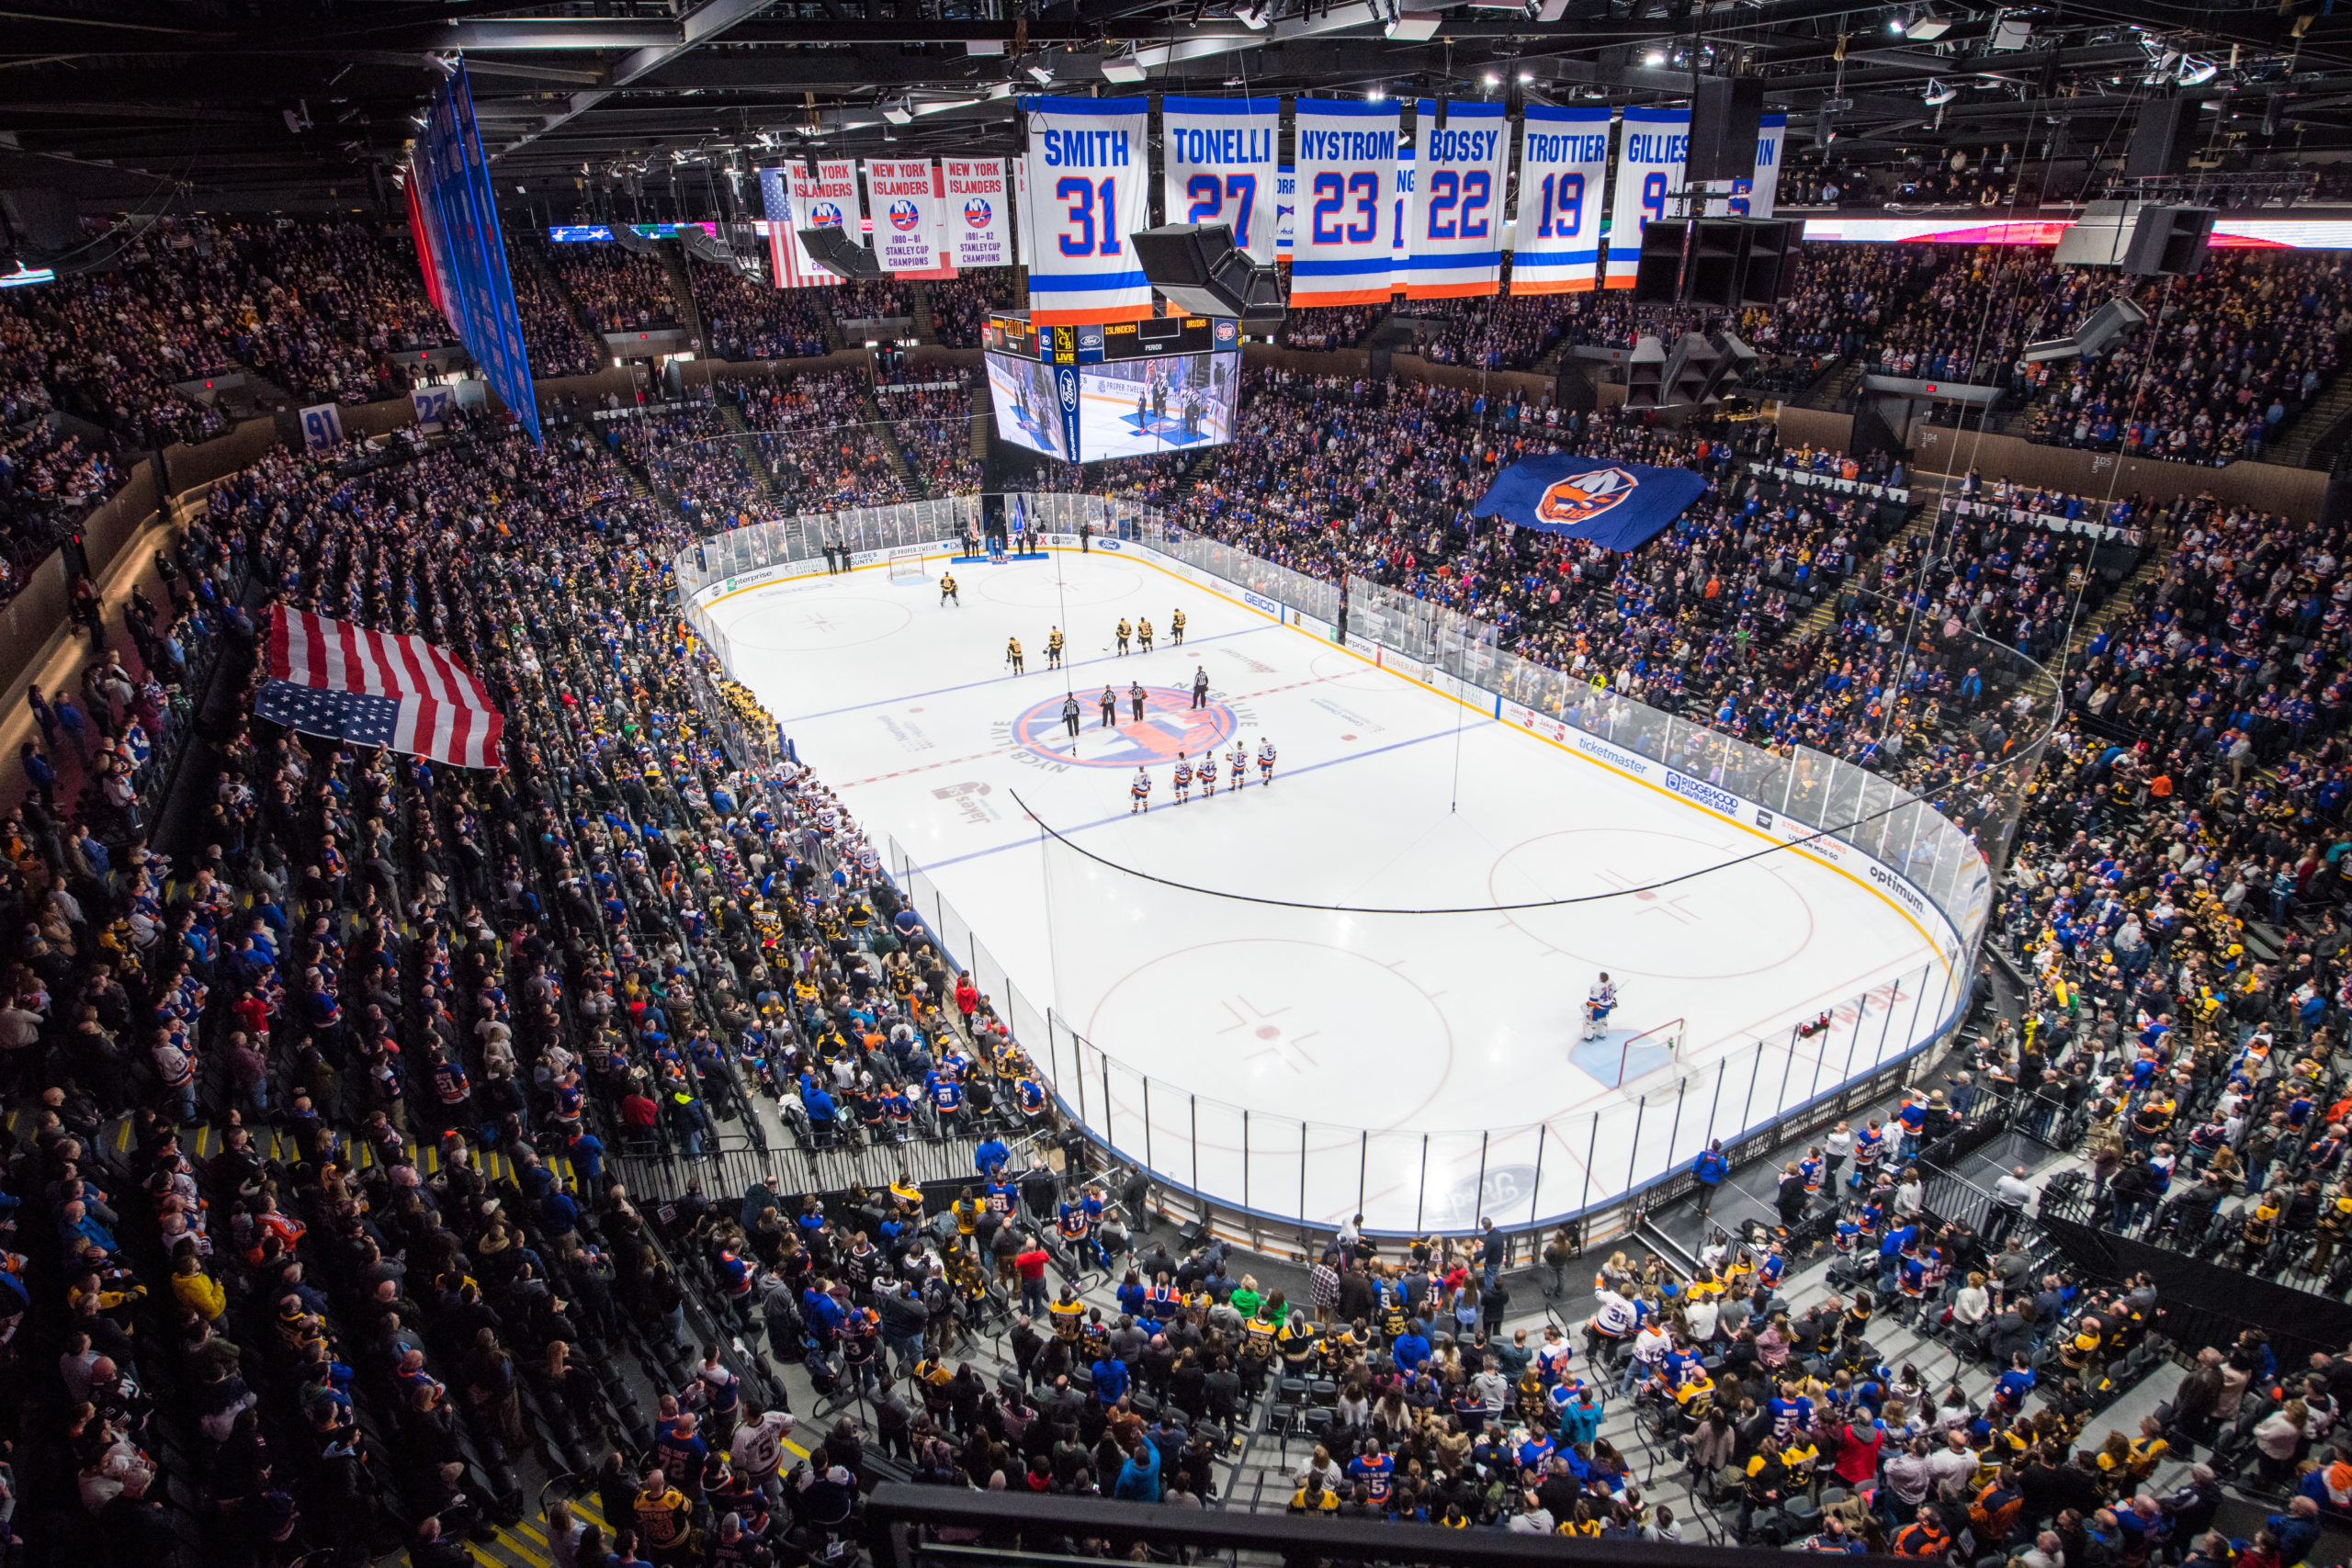 An inside view of the New York Islanders home arena